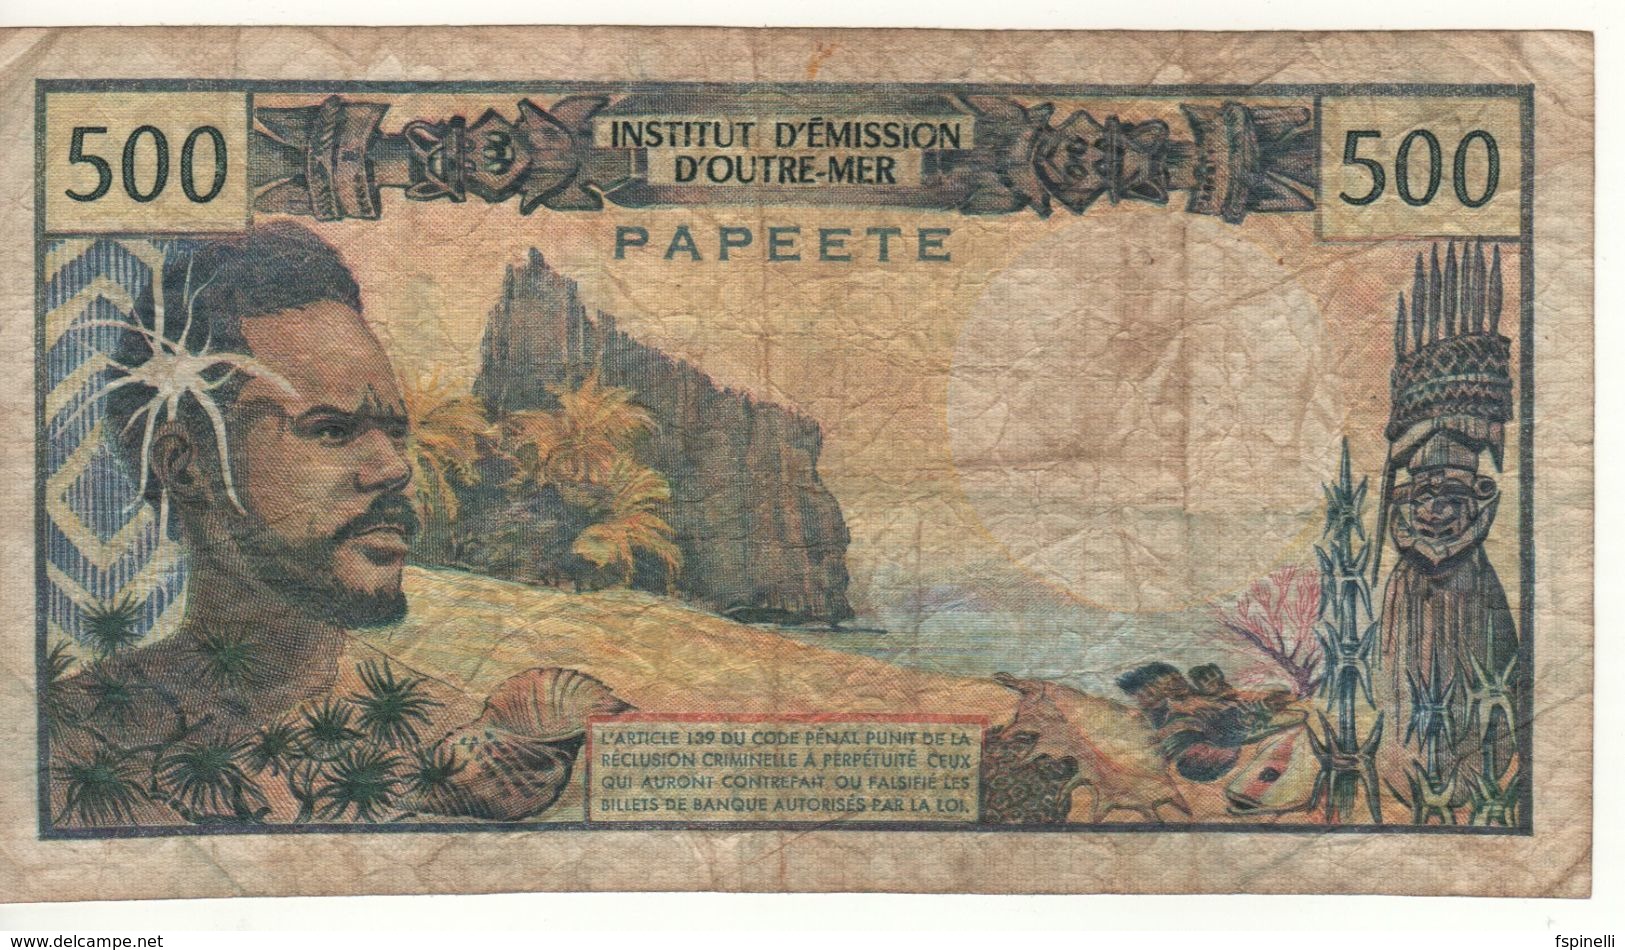 TAHITI   500 Francs INSTITUT D'ÉMISSION D'OUTRE-MER-Papeete   (ND 1985) - Papeete (Polinesia Francese 1914-1985)